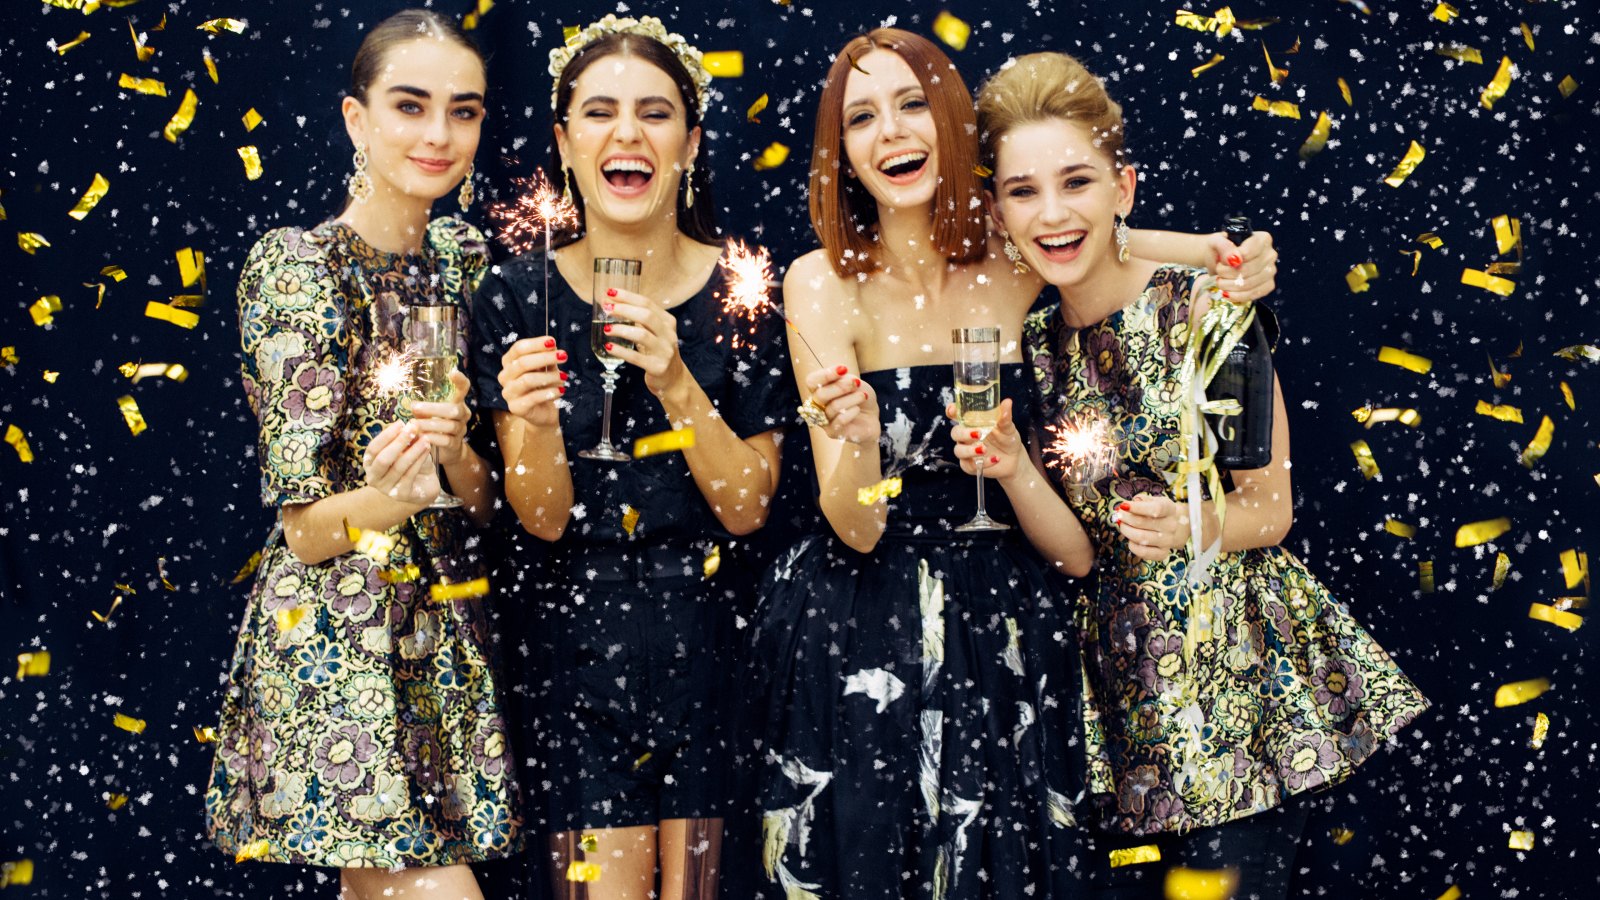 12 New Years Eve Outfit Ideas Perfect For That New Years Party - Society19